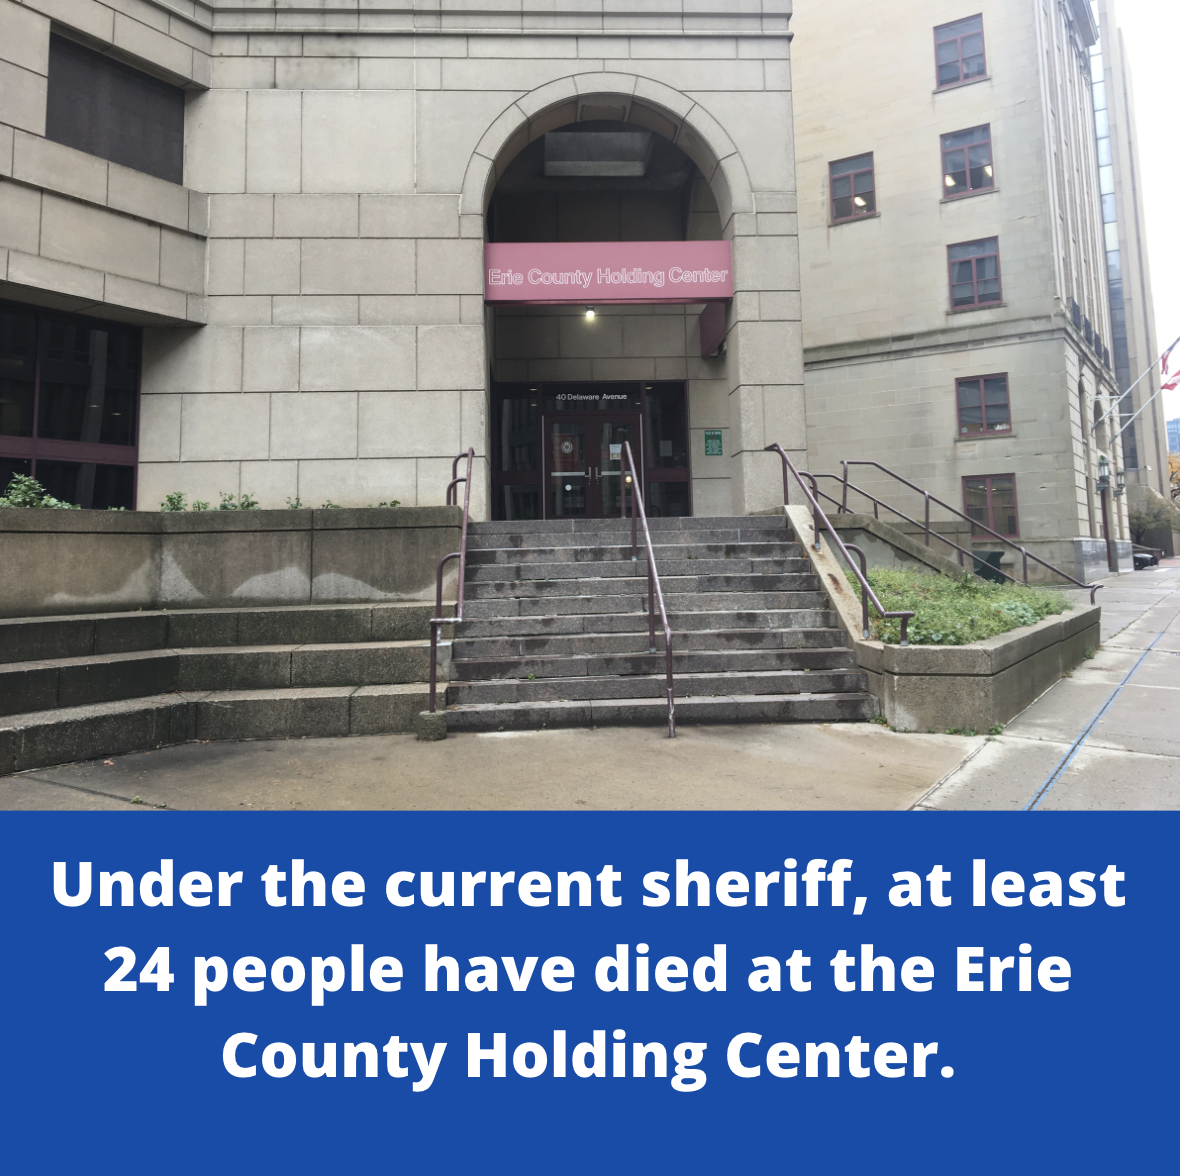 Photo of Erie County Holding center with text "Under the current sheriff, at least 24 people have died at the Erie County Holding Center"